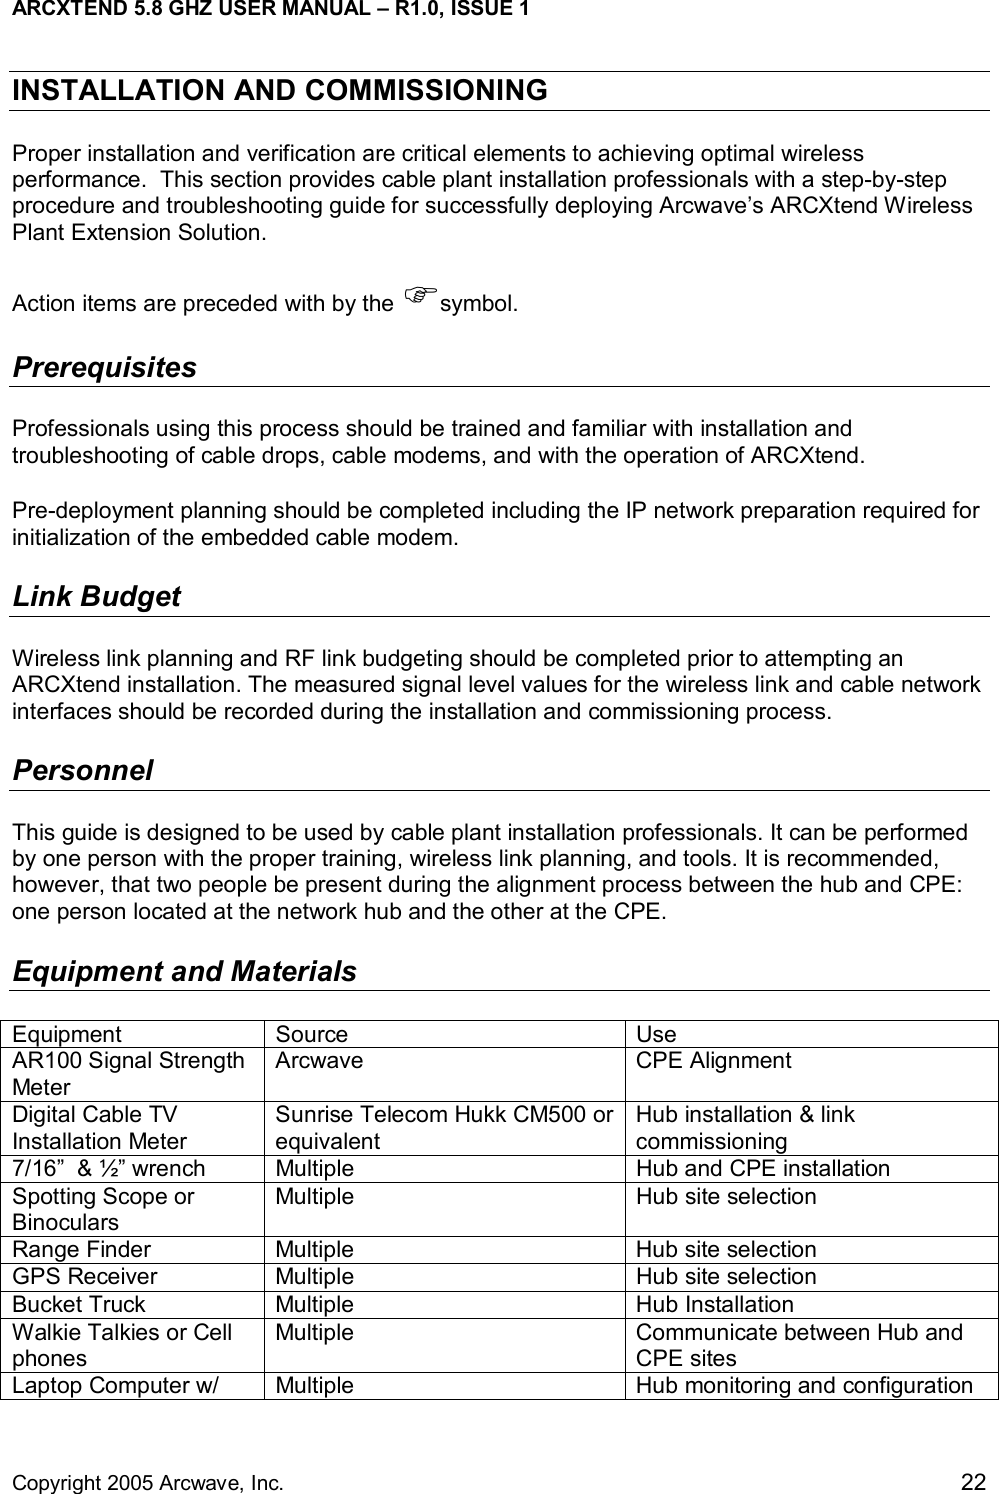 ARCXTEND 5.8 GHZ USER MANUAL – R1.0, ISSUE 1  Copyright 2005 Arcwave, Inc.    22 INSTALLATION AND COMMISSIONING Proper installation and verification are critical elements to achieving optimal wireless performance.  This section provides cable plant installation professionals with a step-by-step procedure and troubleshooting guide for successfully deploying Arcwave’s ARCXtend Wireless Plant Extension Solution.  Action items are preceded with by the )symbol. Prerequisites Professionals using this process should be trained and familiar with installation and troubleshooting of cable drops, cable modems, and with the operation of ARCXtend.  Pre-deployment planning should be completed including the IP network preparation required for initialization of the embedded cable modem.  Link Budget Wireless link planning and RF link budgeting should be completed prior to attempting an ARCXtend installation. The measured signal level values for the wireless link and cable network interfaces should be recorded during the installation and commissioning process.  Personnel This guide is designed to be used by cable plant installation professionals. It can be performed by one person with the proper training, wireless link planning, and tools. It is recommended, however, that two people be present during the alignment process between the hub and CPE: one person located at the network hub and the other at the CPE. Equipment and Materials Equipment Source  Use AR100 Signal Strength Meter  Arcwave CPE Alignment Digital Cable TV Installation Meter Sunrise Telecom Hukk CM500 or equivalent Hub installation &amp; link commissioning   7/16”  &amp; ½” wrench  Multiple  Hub and CPE installation Spotting Scope or Binoculars Multiple  Hub site selection Range Finder  Multiple  Hub site selection GPS Receiver  Multiple  Hub site selection Bucket Truck  Multiple  Hub Installation Walkie Talkies or Cell phones Multiple  Communicate between Hub and CPE sites Laptop Computer w/  Multiple  Hub monitoring and configuration 